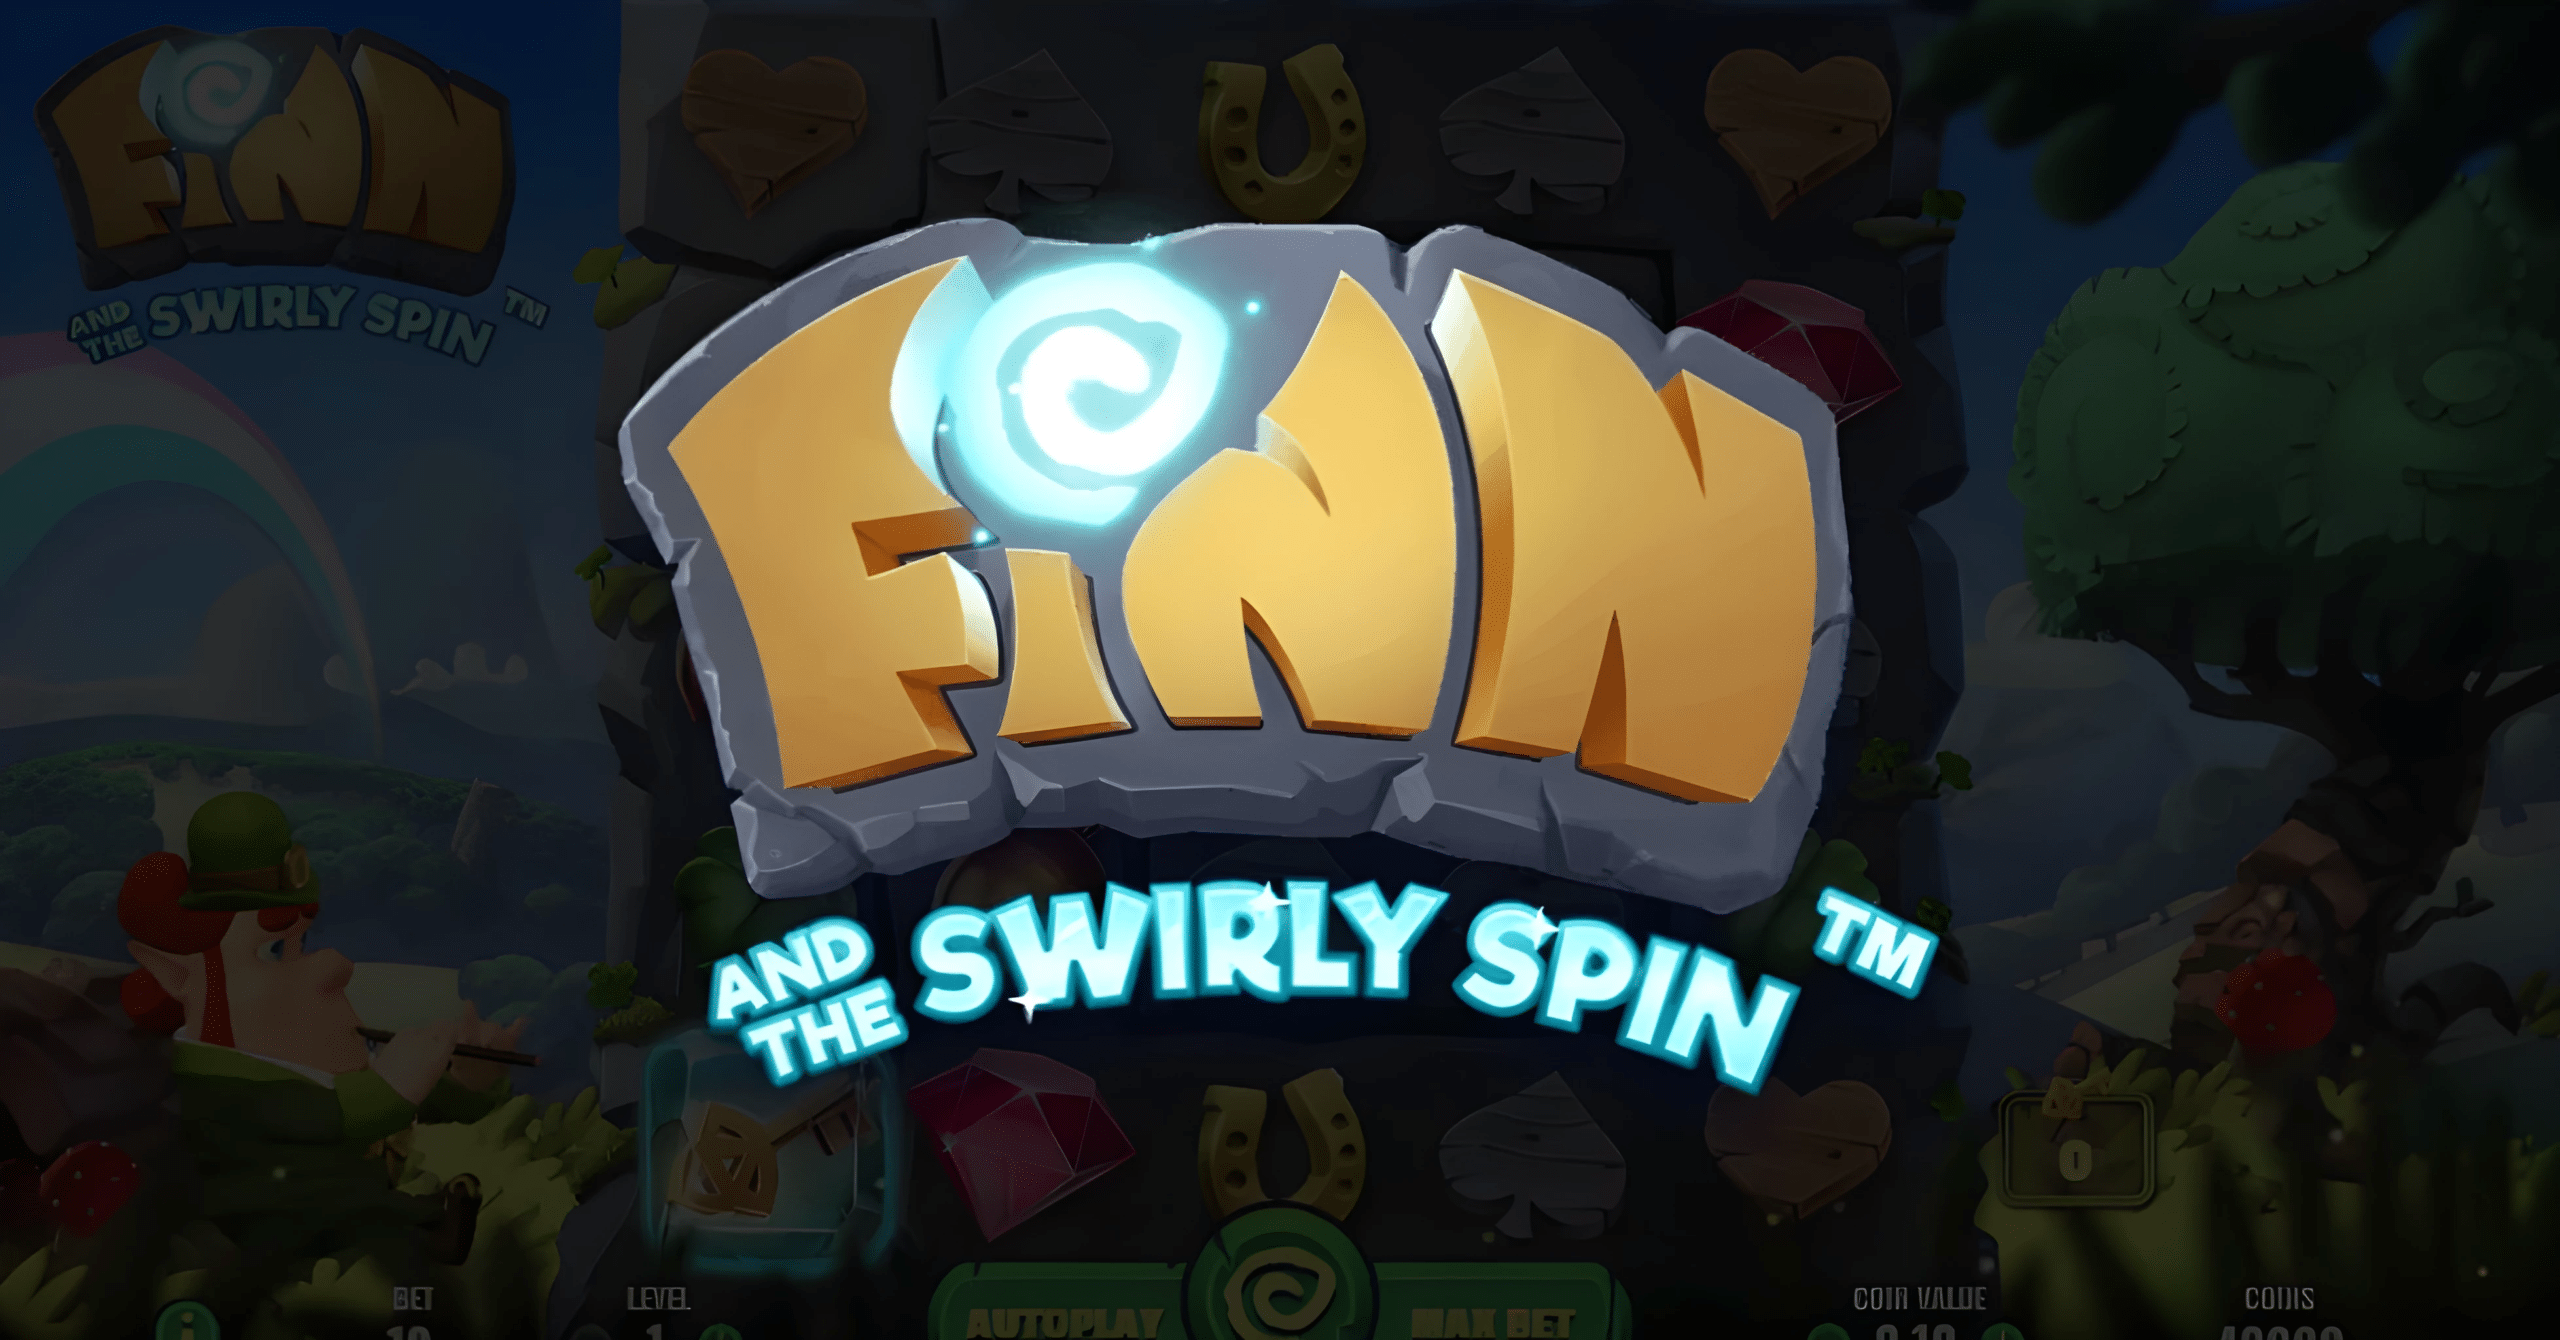 Finn and the Swirly Spin Slot: Irish Charm on the Reels